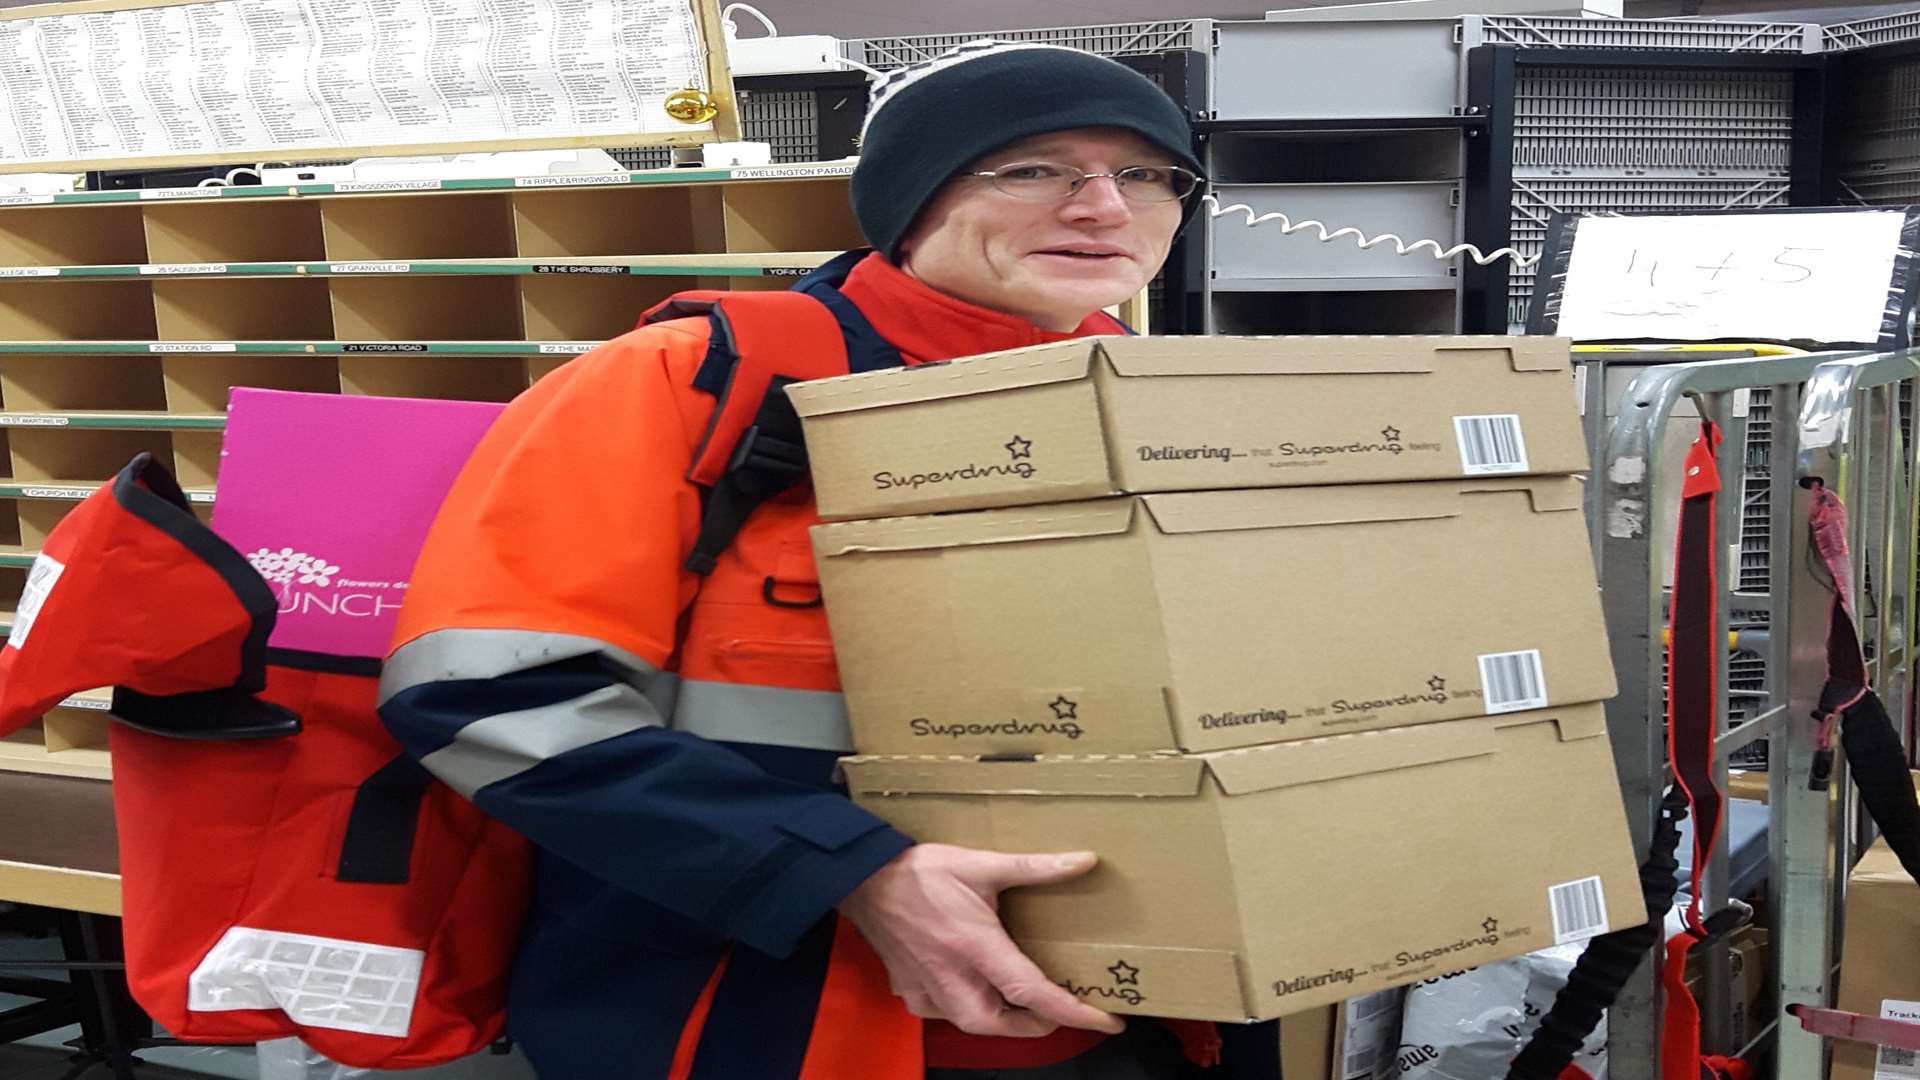 Malcolm Smith loaded up with parcels